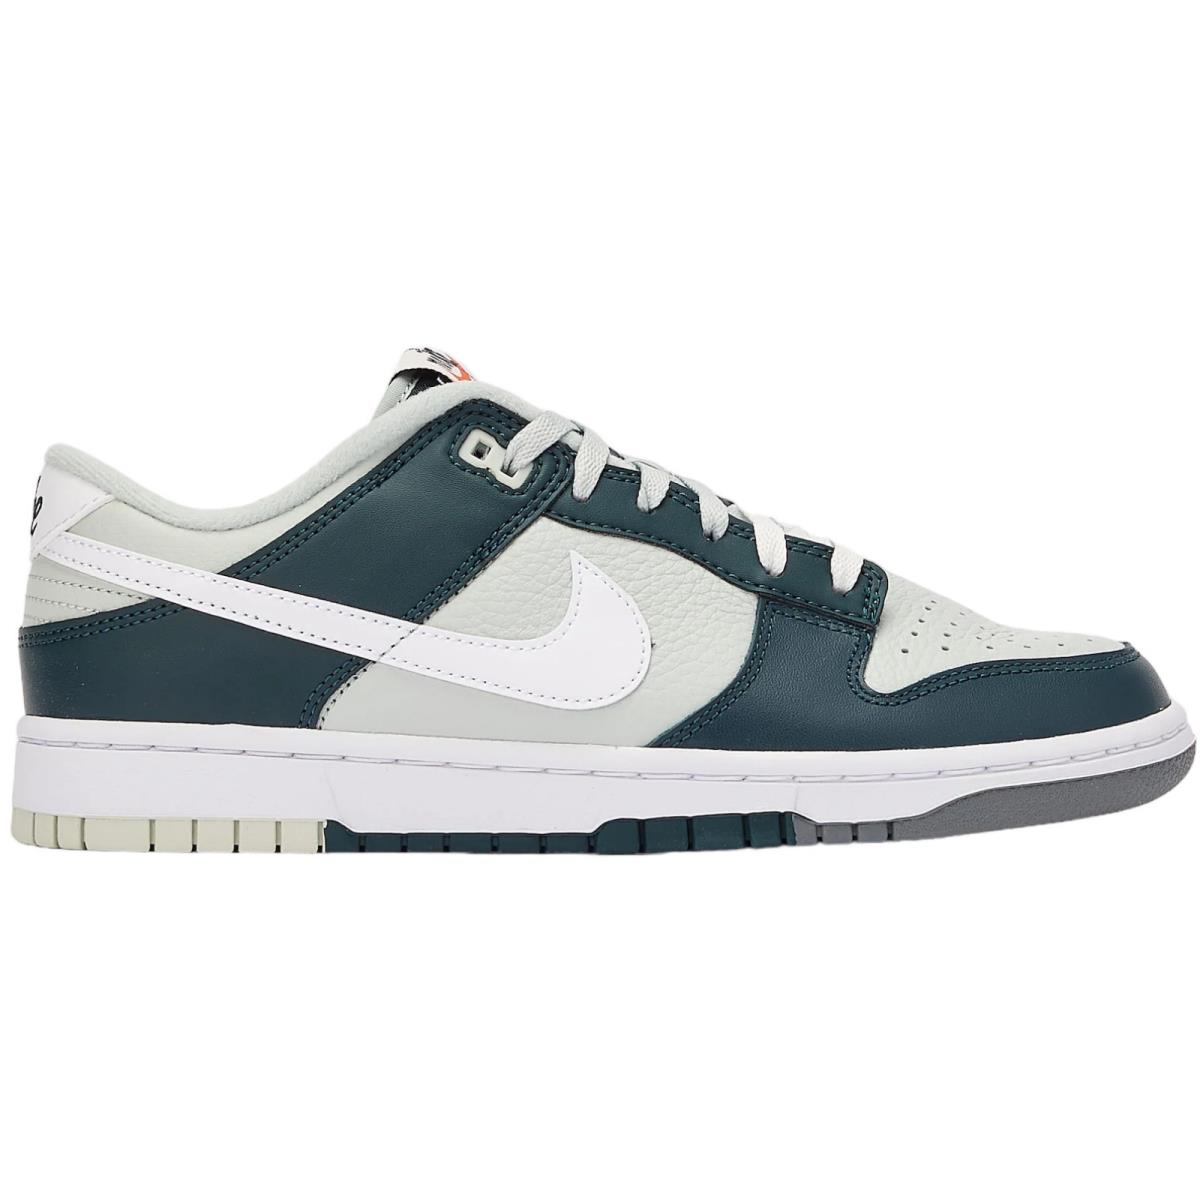 Nike Dunk Low Retro Men`s Casual Shoes All Colors US Sizes 7-14 Deep Jungle/White/Light Silver